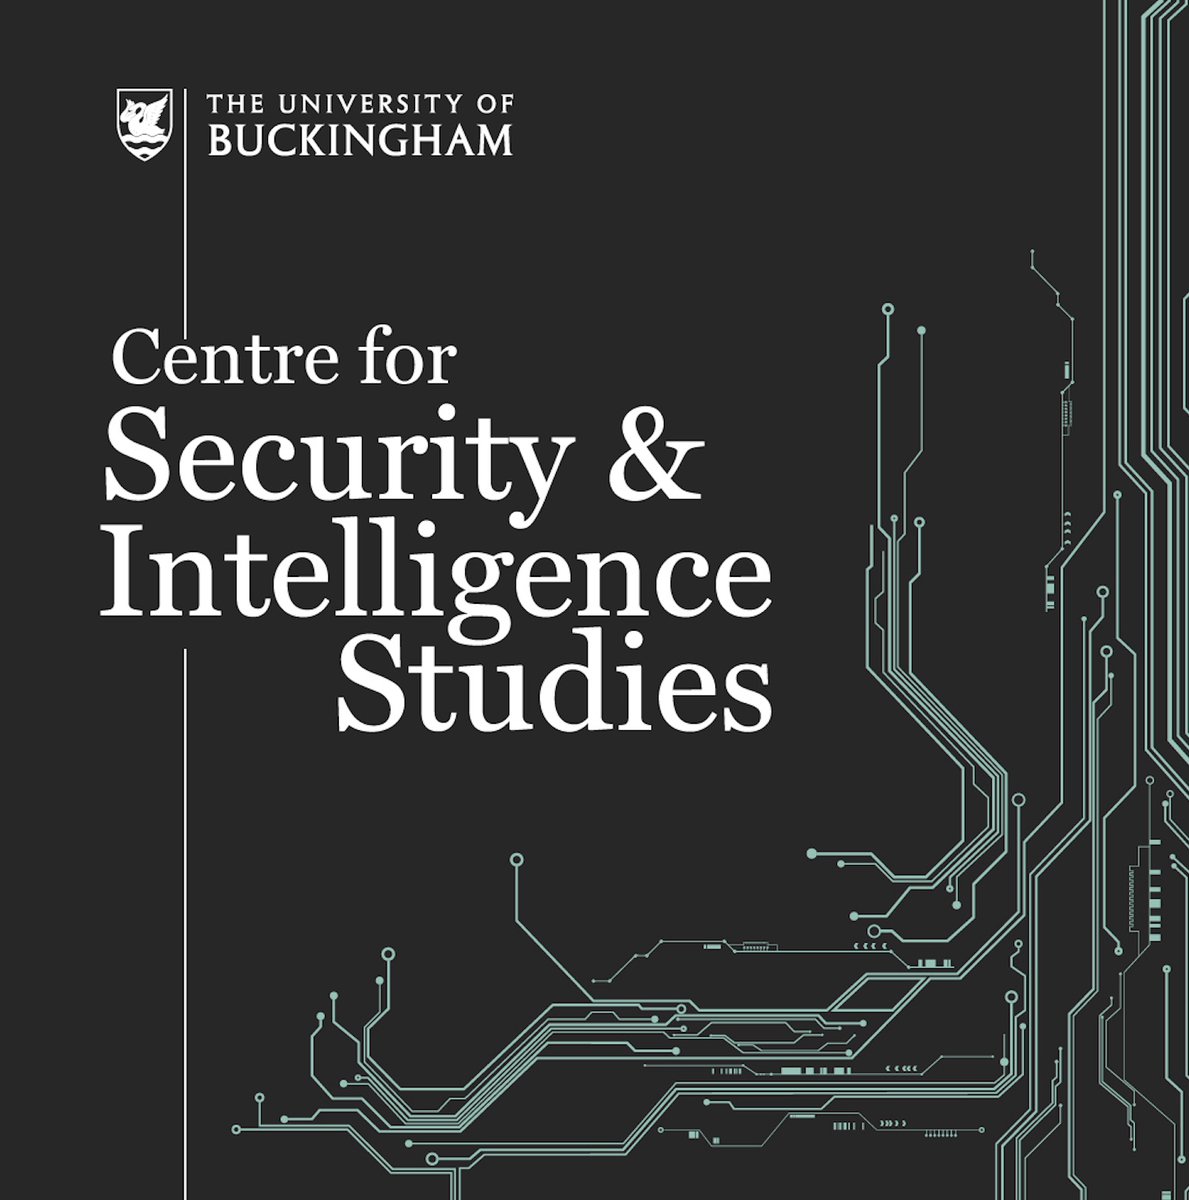 PROGRAMMES: We are now inviting applications for our September 2024 intakes for the online PG Cert / MA in Covert Action, HUMINT & the Psychology of Intelligence Elicitation. These can both be taken part time or full time. For more details, please visit bit.ly/3TNBVNH